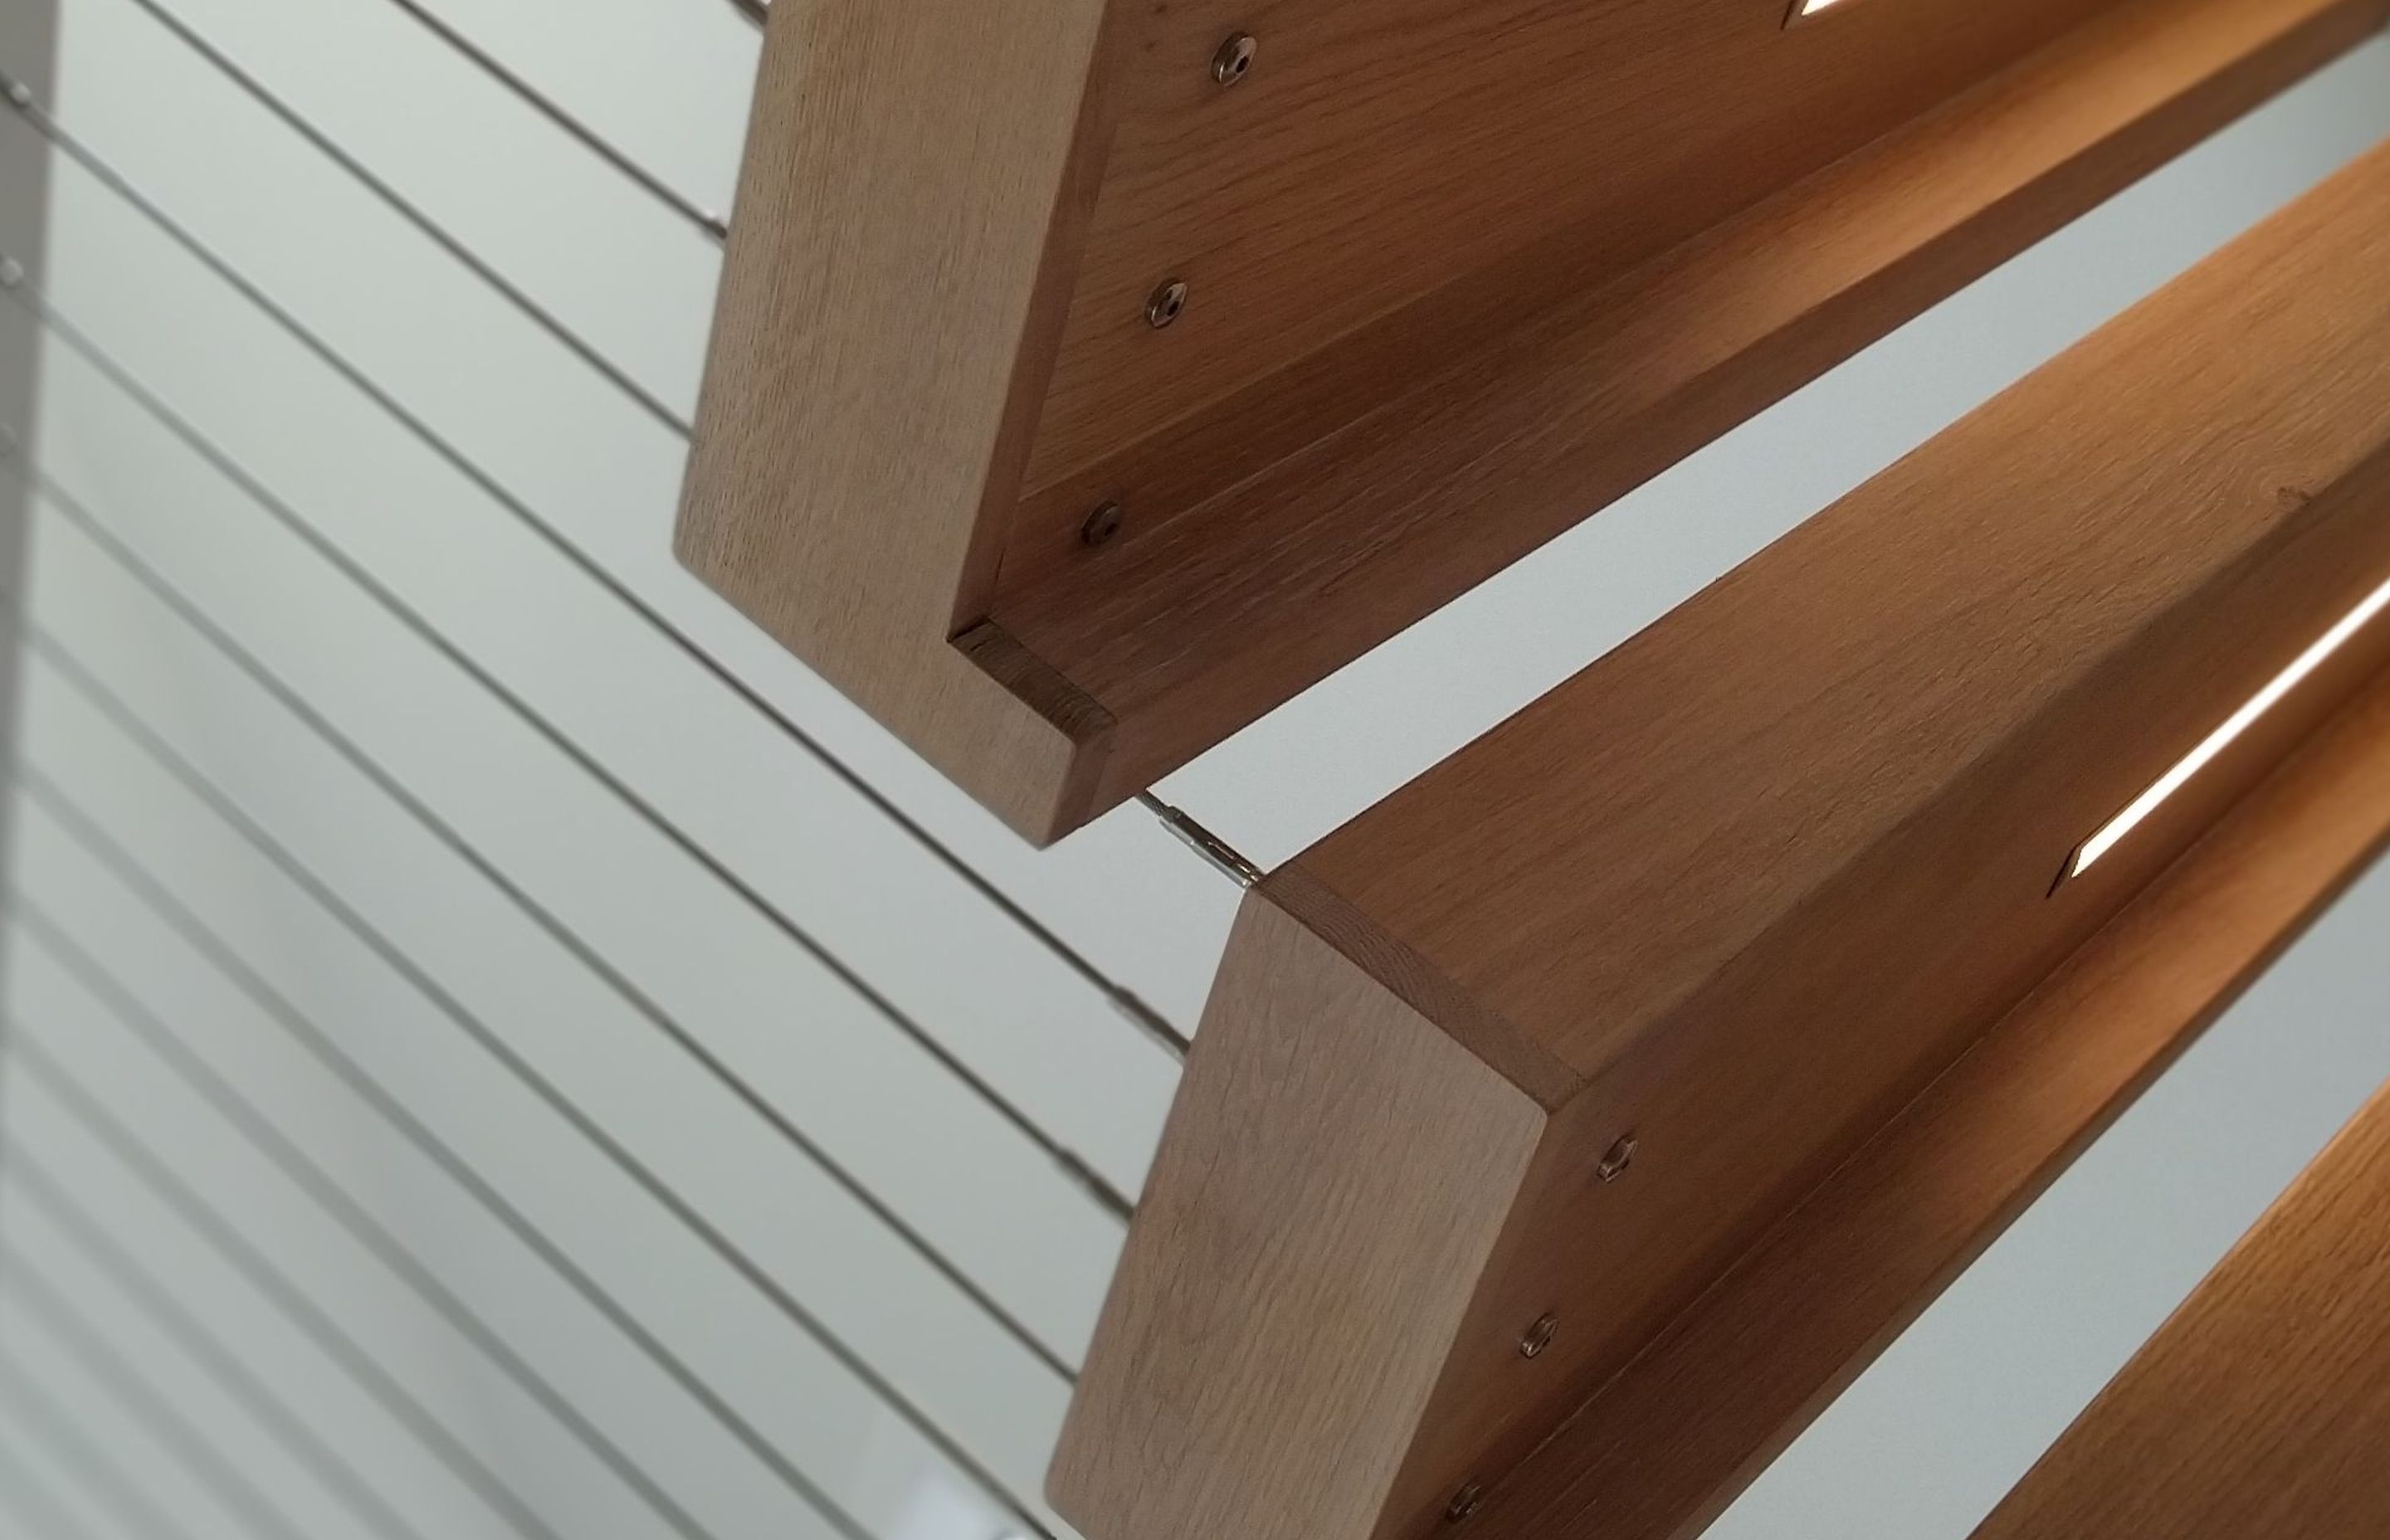 Floating stairs - residential wire balustrade infil